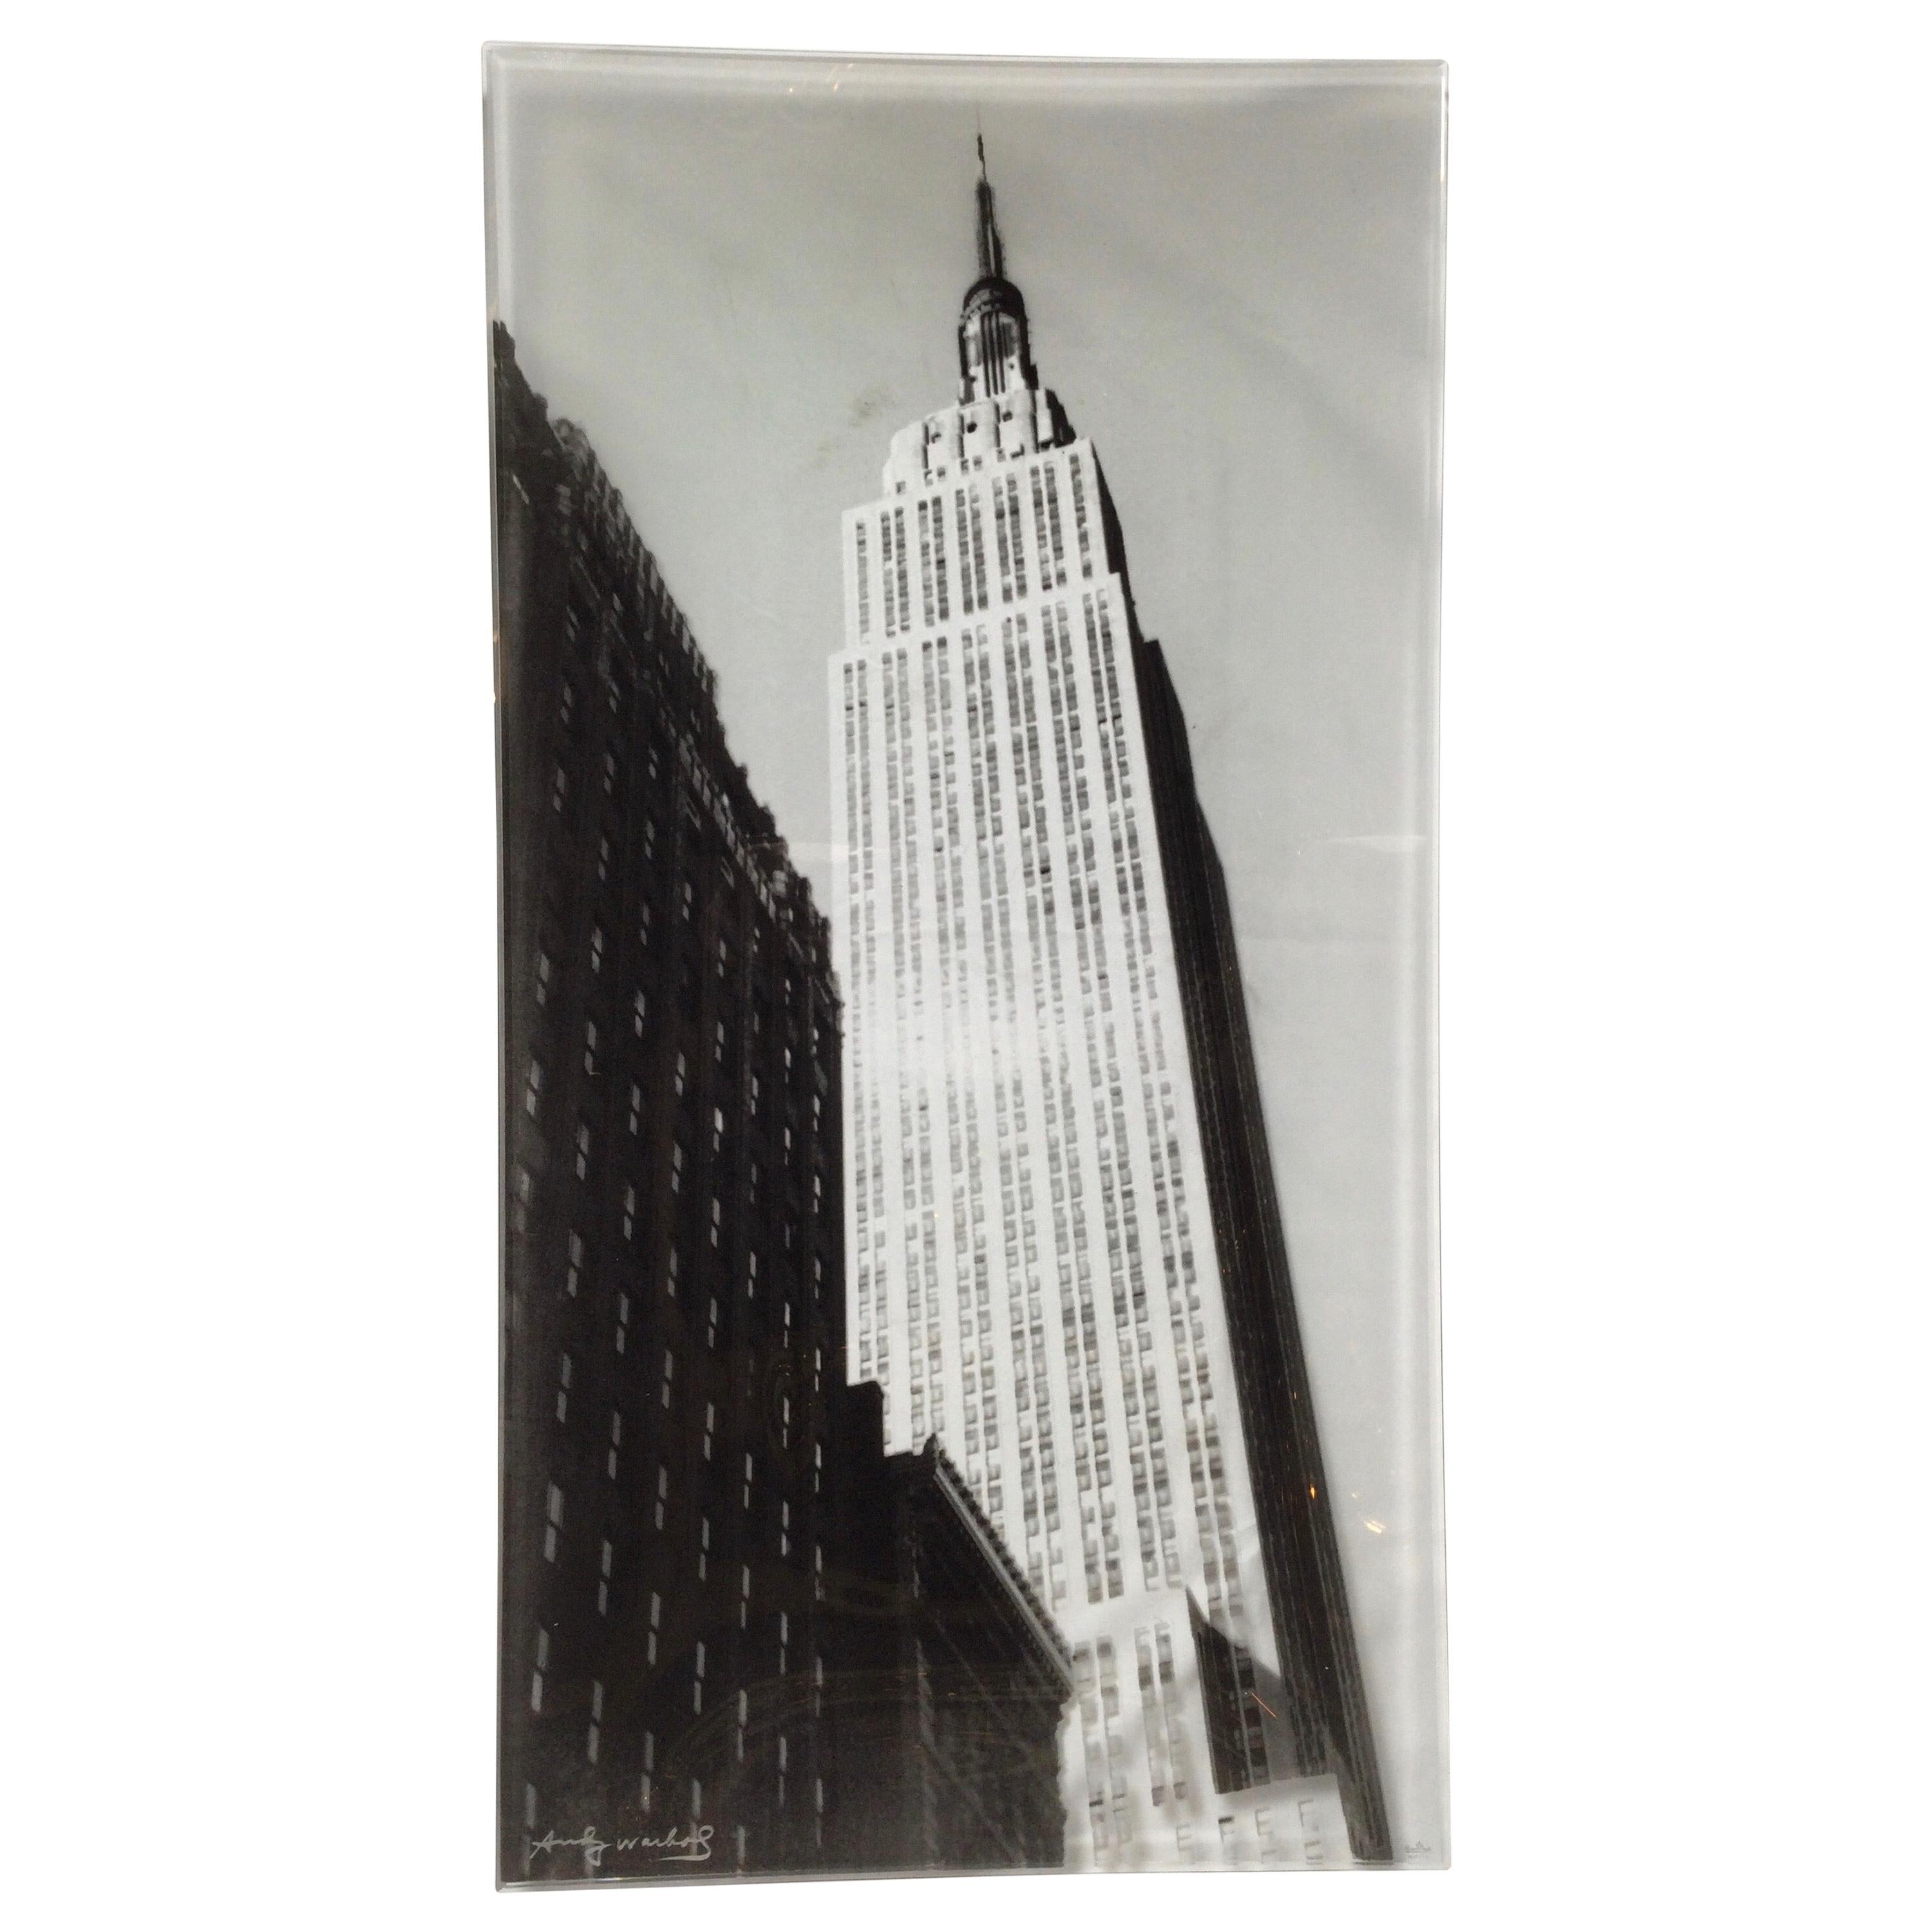 Vintage Andy Warhol Empire State Building Glass Tray by Rosenthal